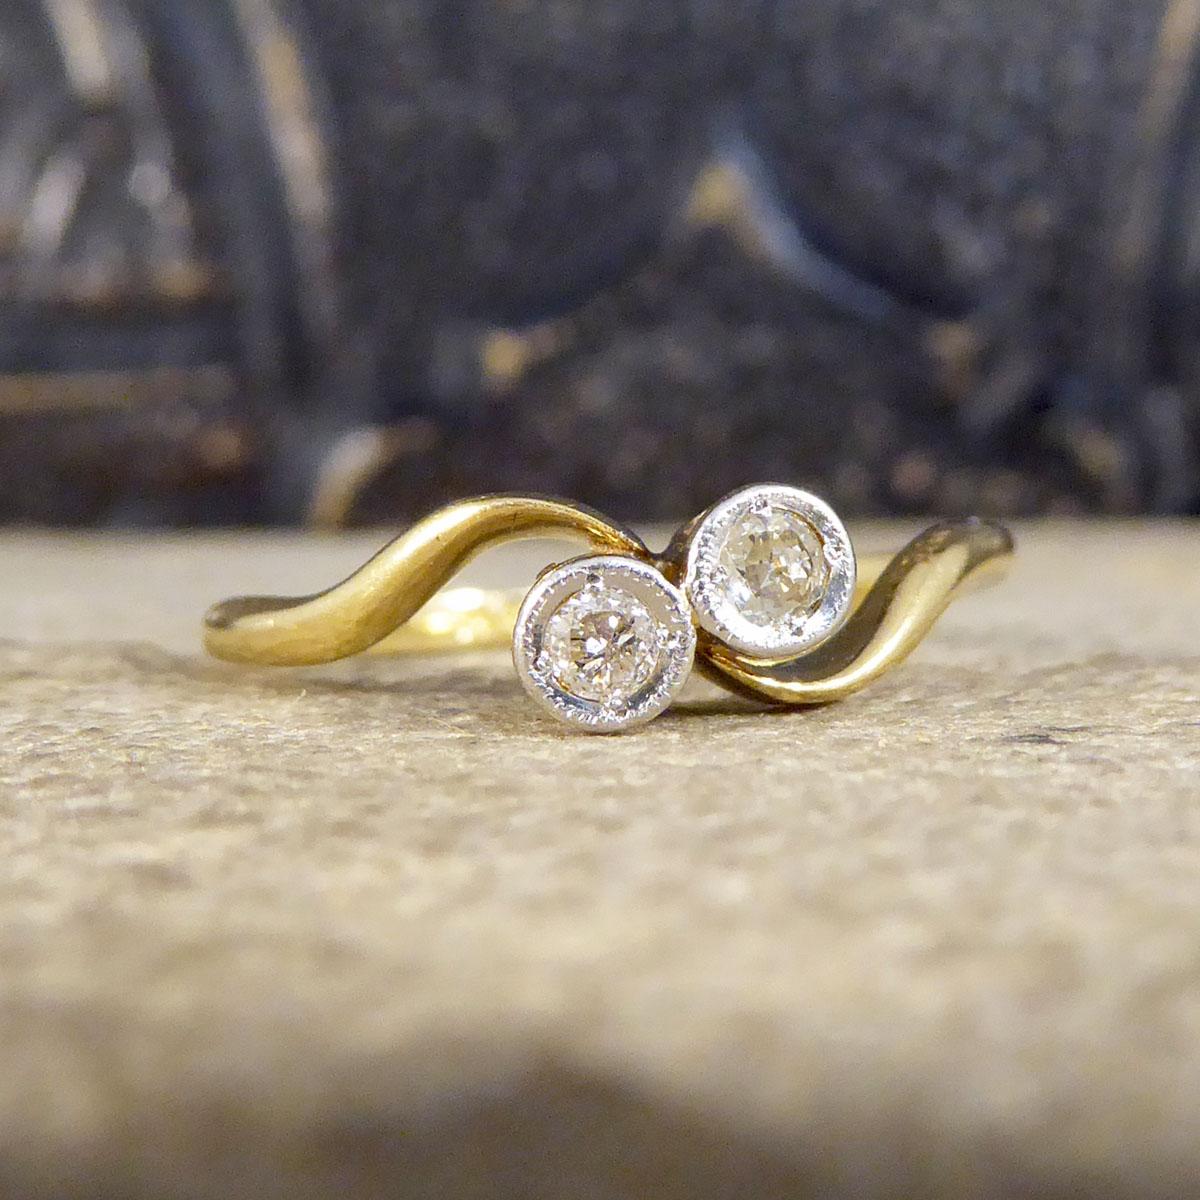 A very elegant two stone diamond twist ring that is set with two sparkling diamonds weighing a total of 0.15ct. The stones are set in Platinum rub over collar setting on the top with a milgrain detail, a typical style setting for an Edwardian ring.